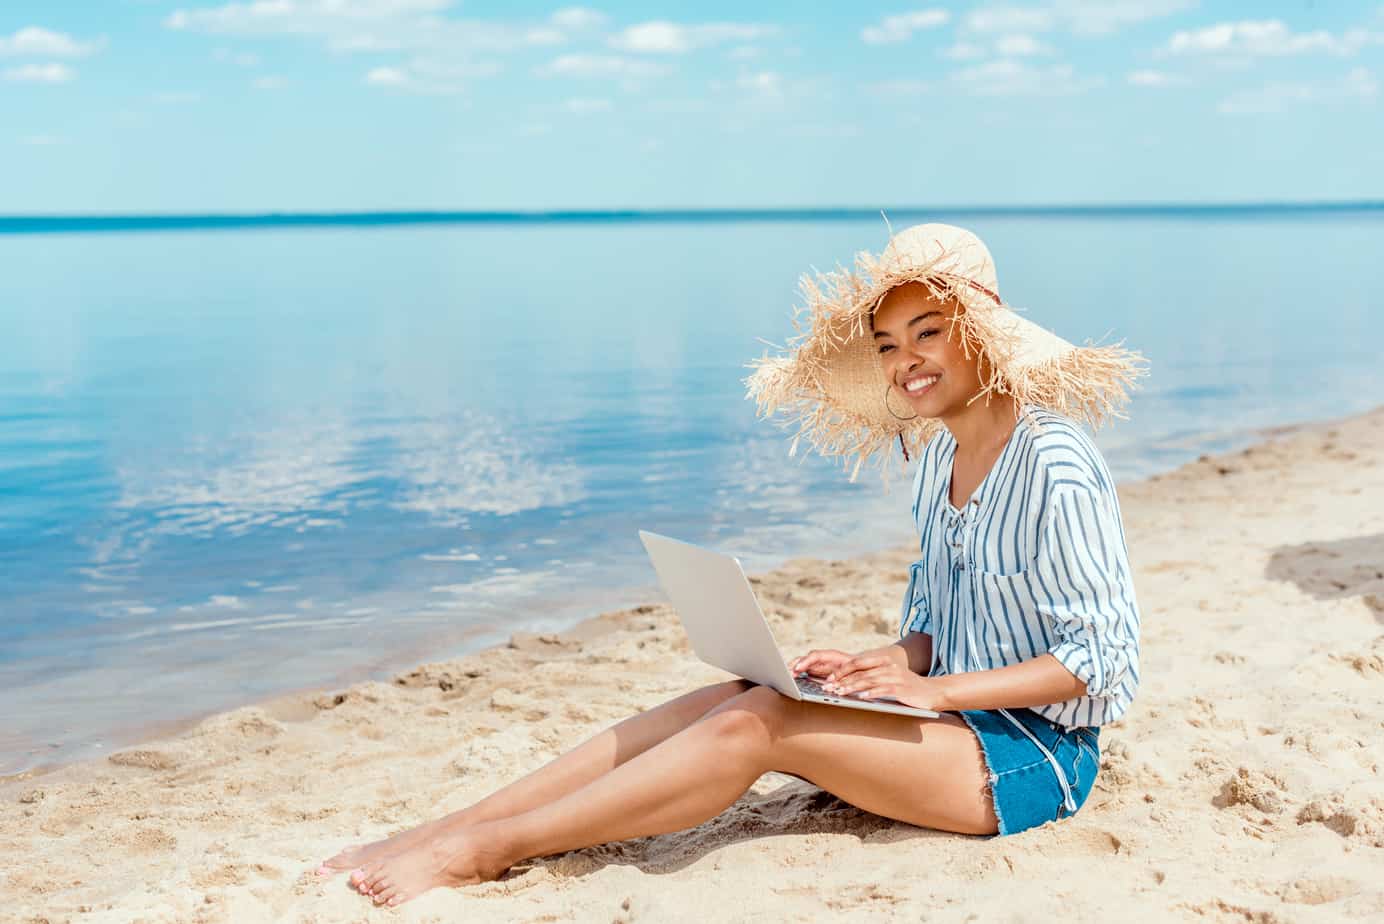 20 Easy Summer Jobs that Offer a Fun Way to Make Some Money